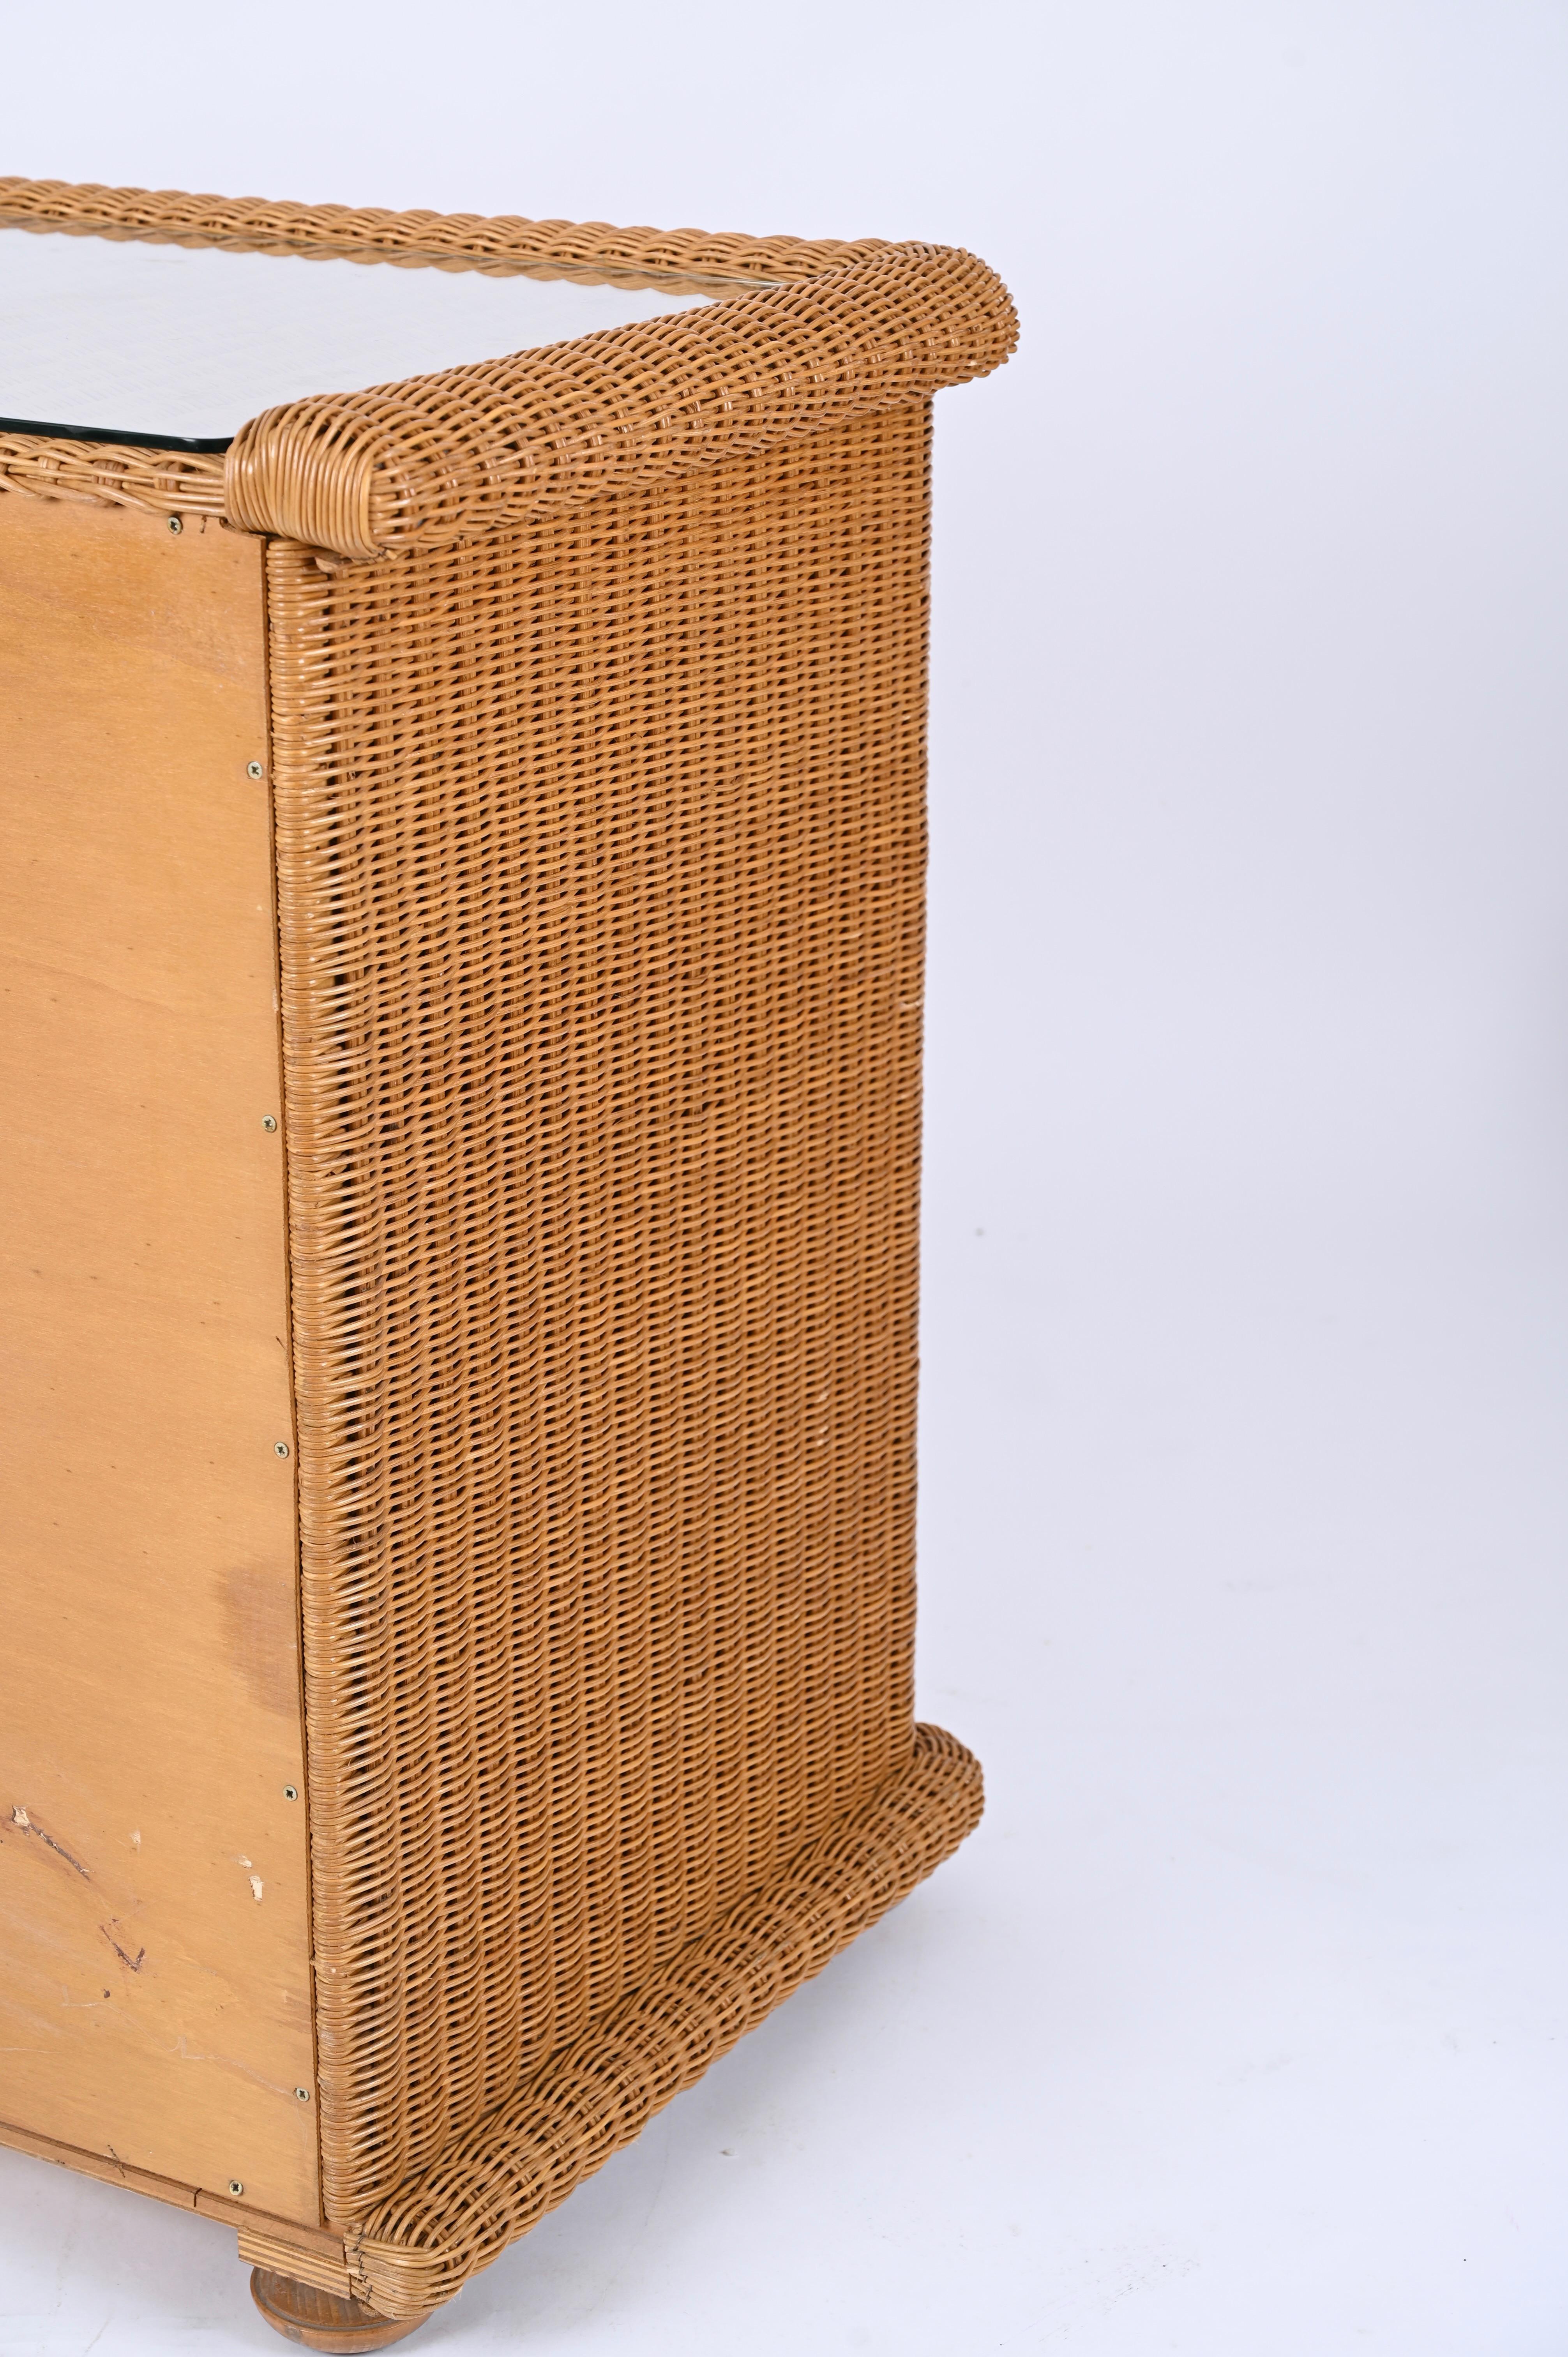 French Riviera Chest of Drawers in Woven Rattan by Vivai del Sud, Italy, 1970s For Sale 10